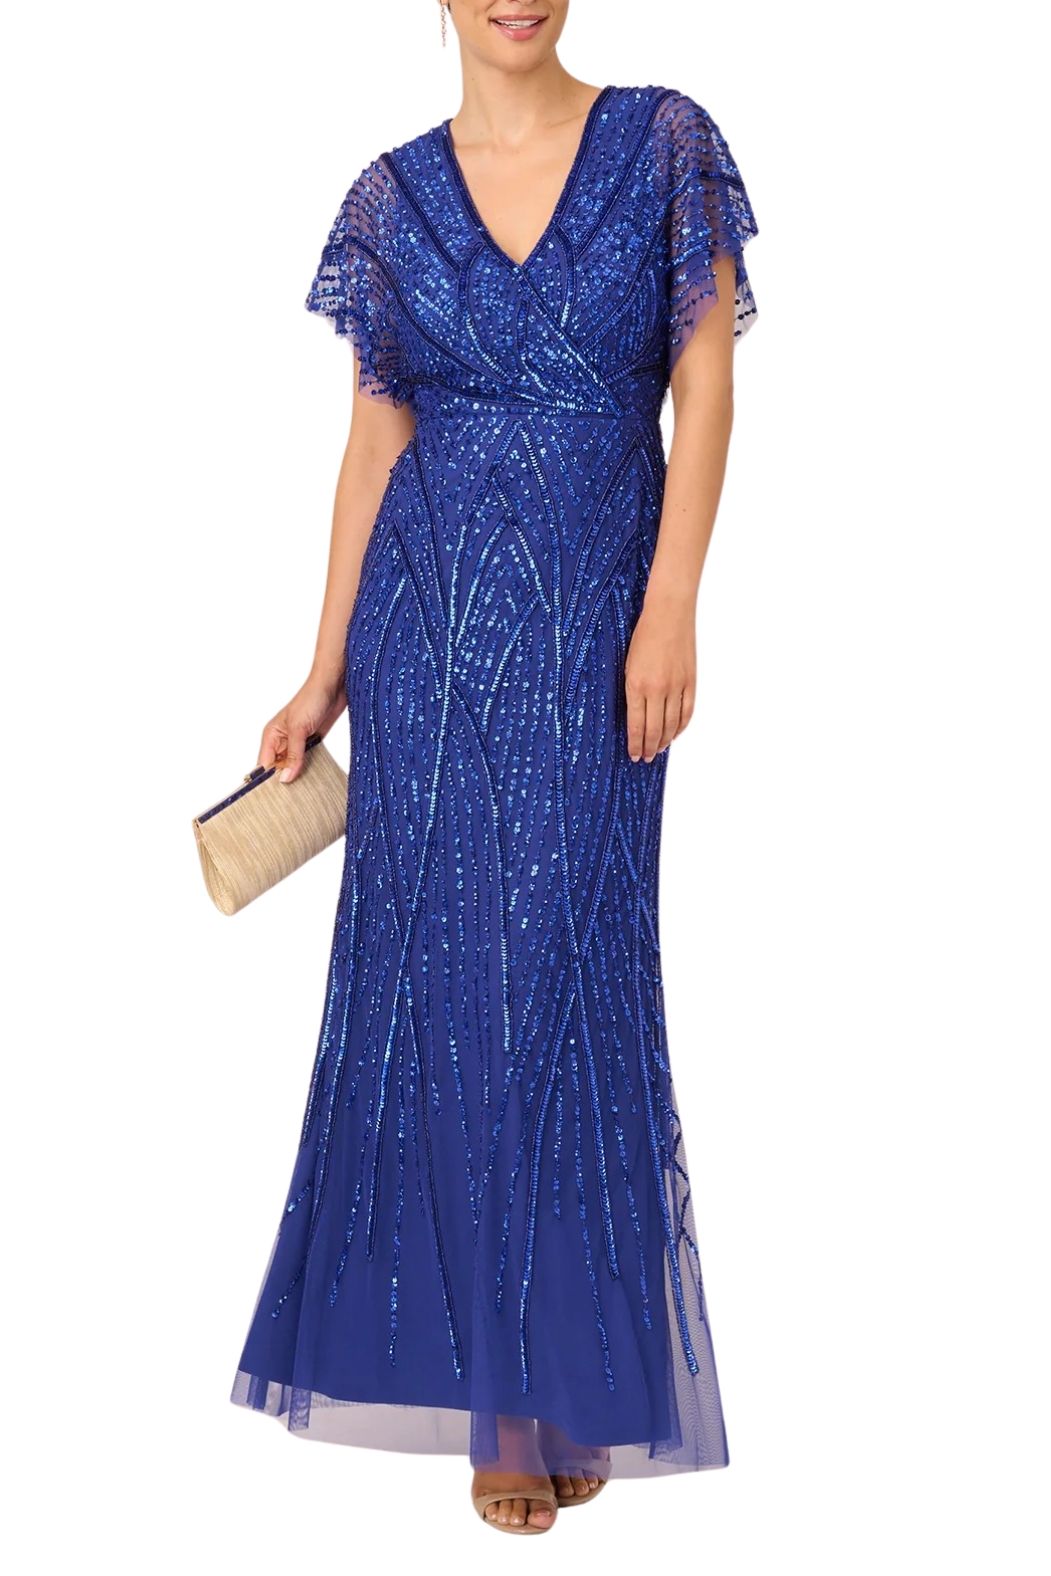 Adrianna Papell Mermaid with Dolman Sleeves Petite Gown